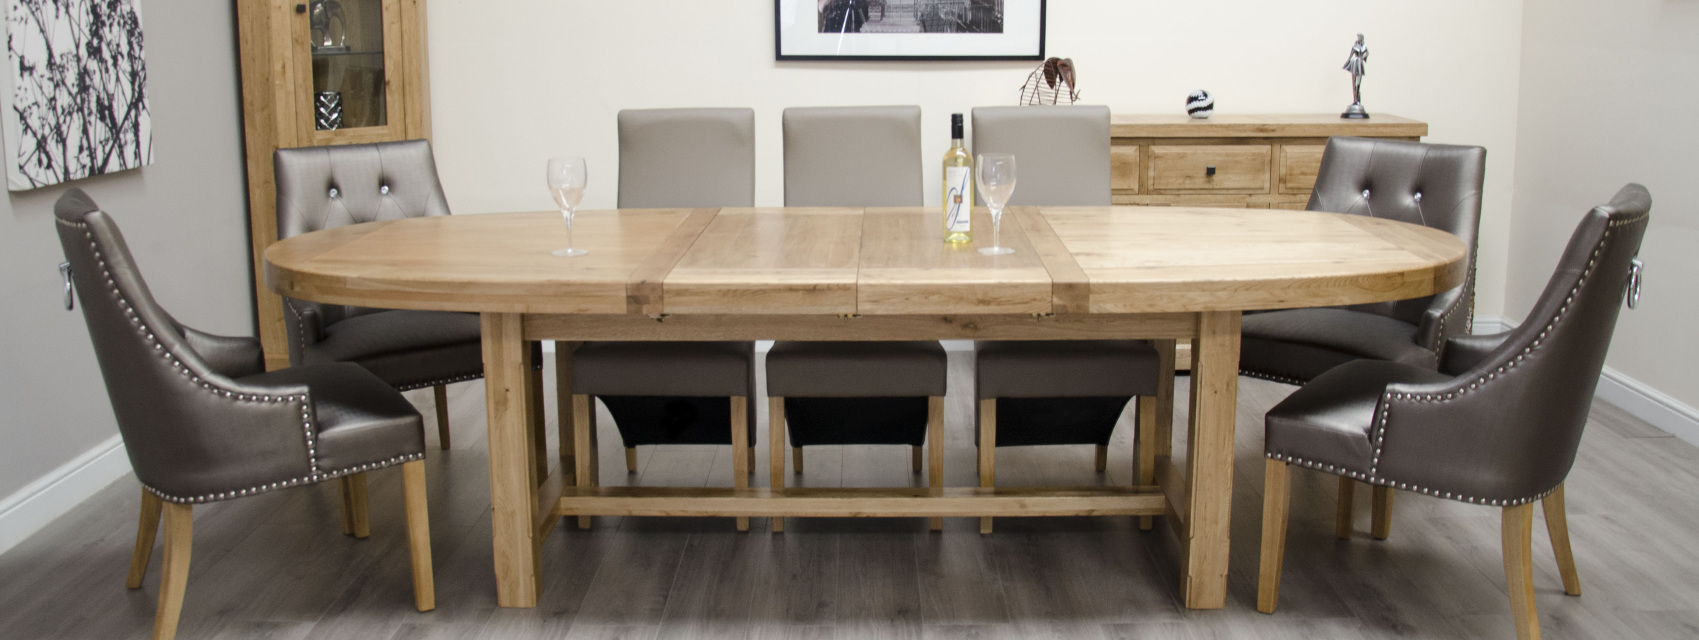 SIGNATURE Solid Oak - Super Oval Twin Leaf Extending Dining Table 210cm